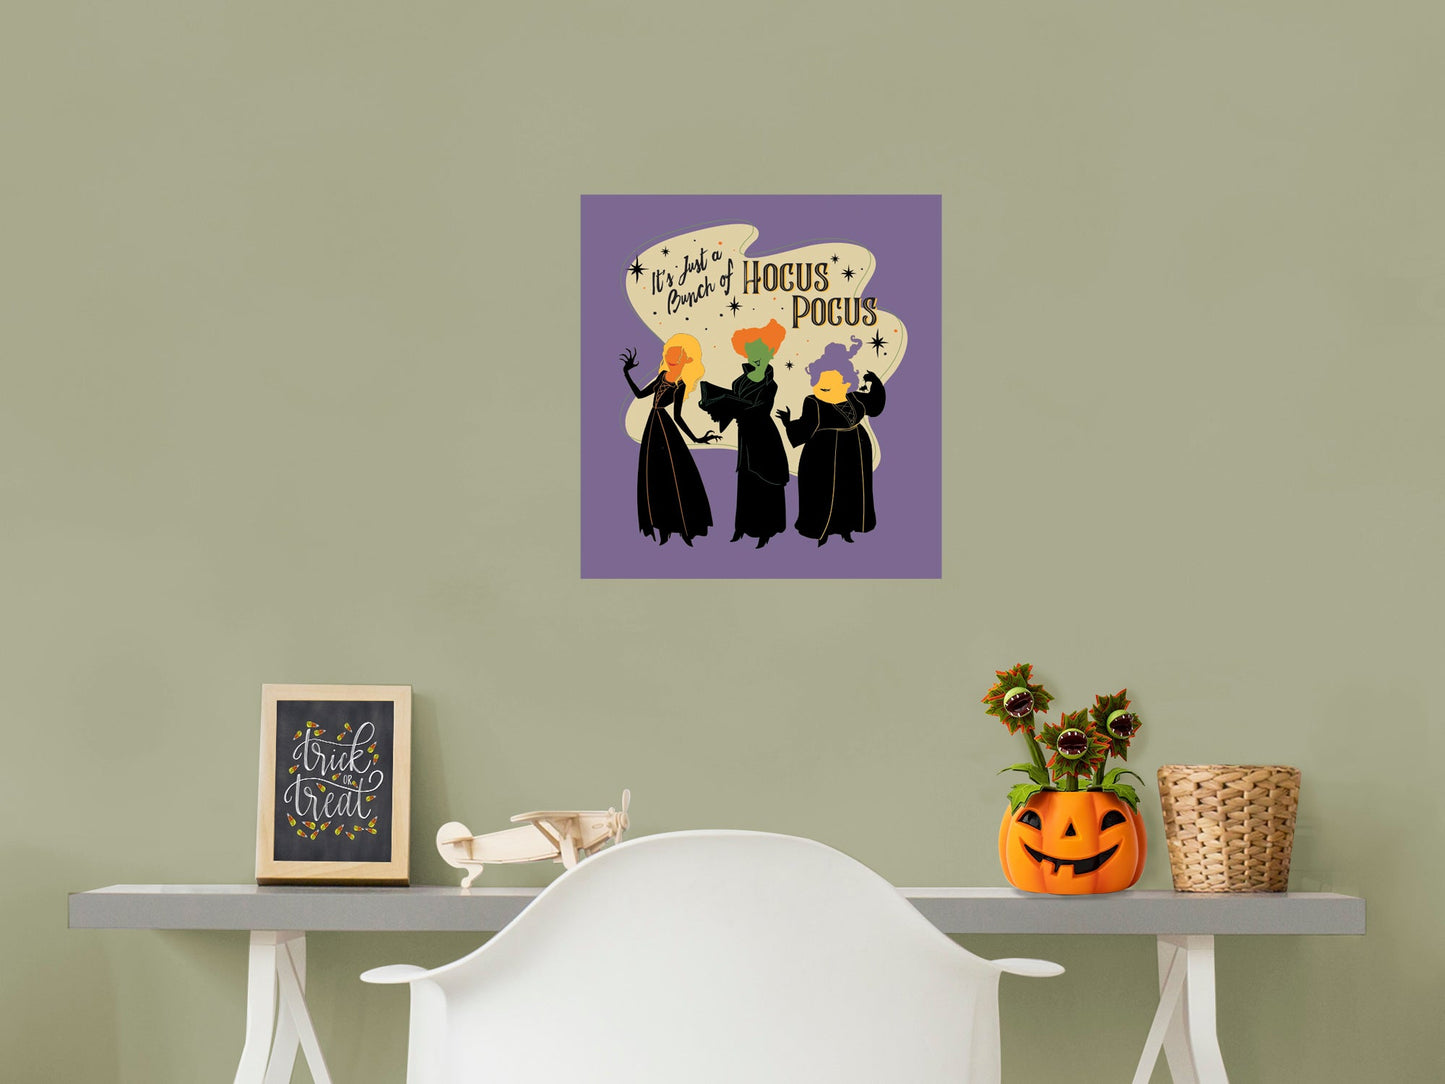 Hocus Pocus:  It's just a bunch of Hocus Pocus Mural        - Officially Licensed Disney Removable Wall   Adhesive Decal